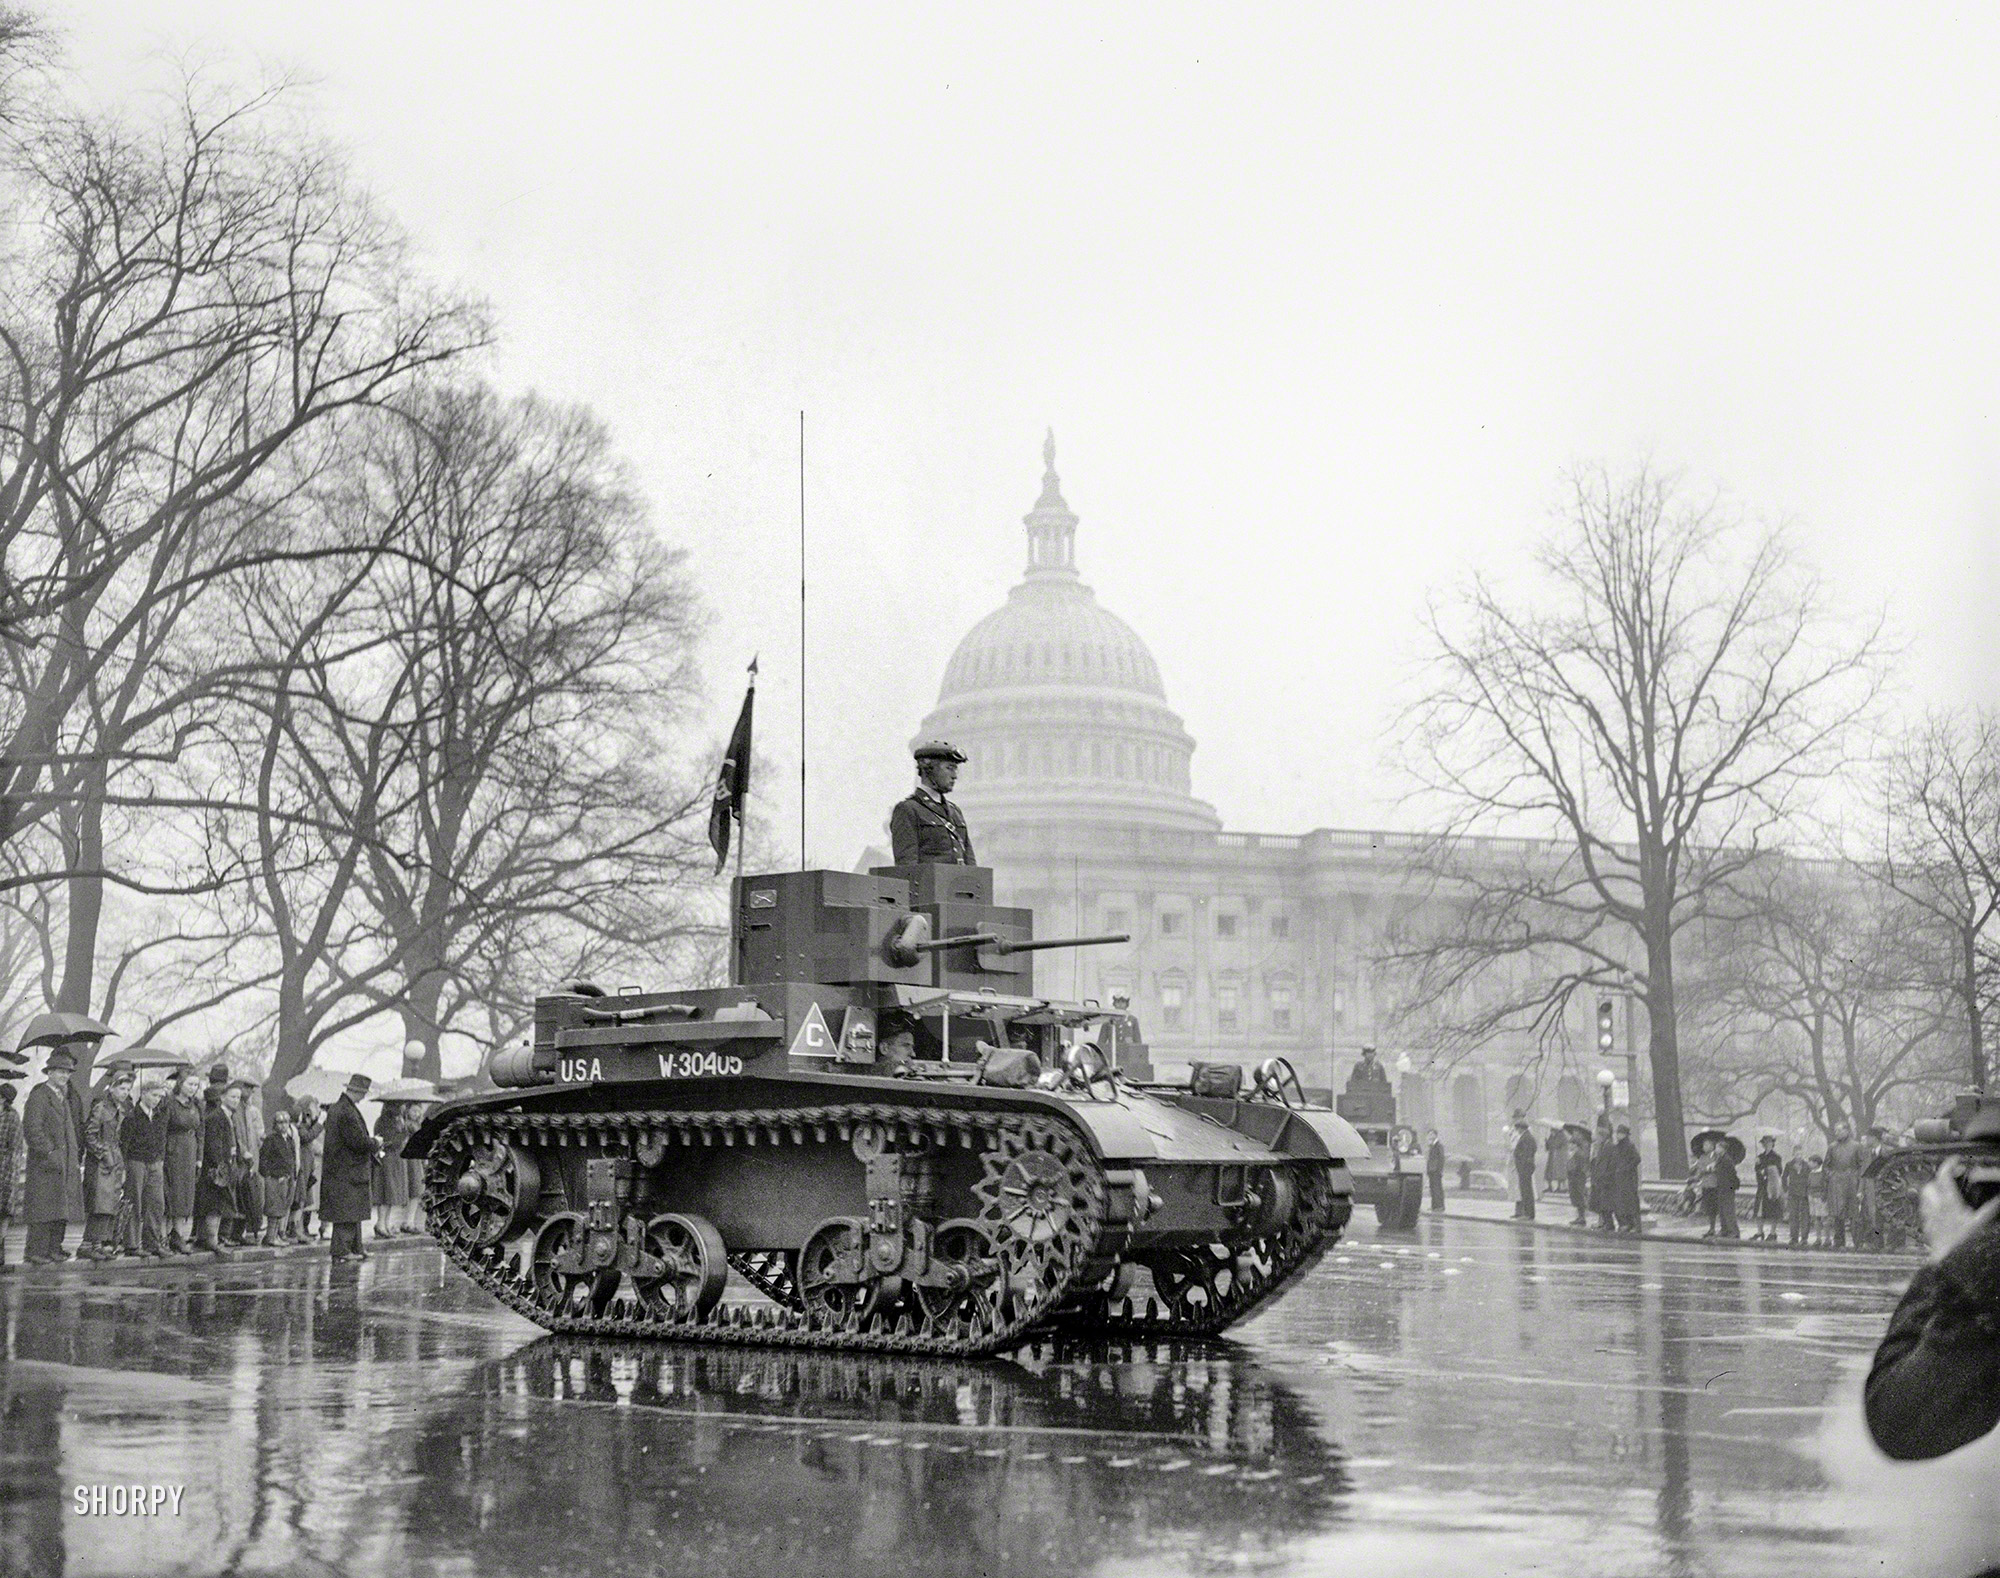 April 6, 1939. "Memories of the World War were revived today as the latest types of tanks, preceded by 20,000 soldiers and veterans, paraded past the U.S. Capitol in the annual Army Day Parade which marked the 22nd anniversary of America into the World War. Thousands braved a heavy downpour to view the parade." Harris & Ewing Collection glass negative. View full size.